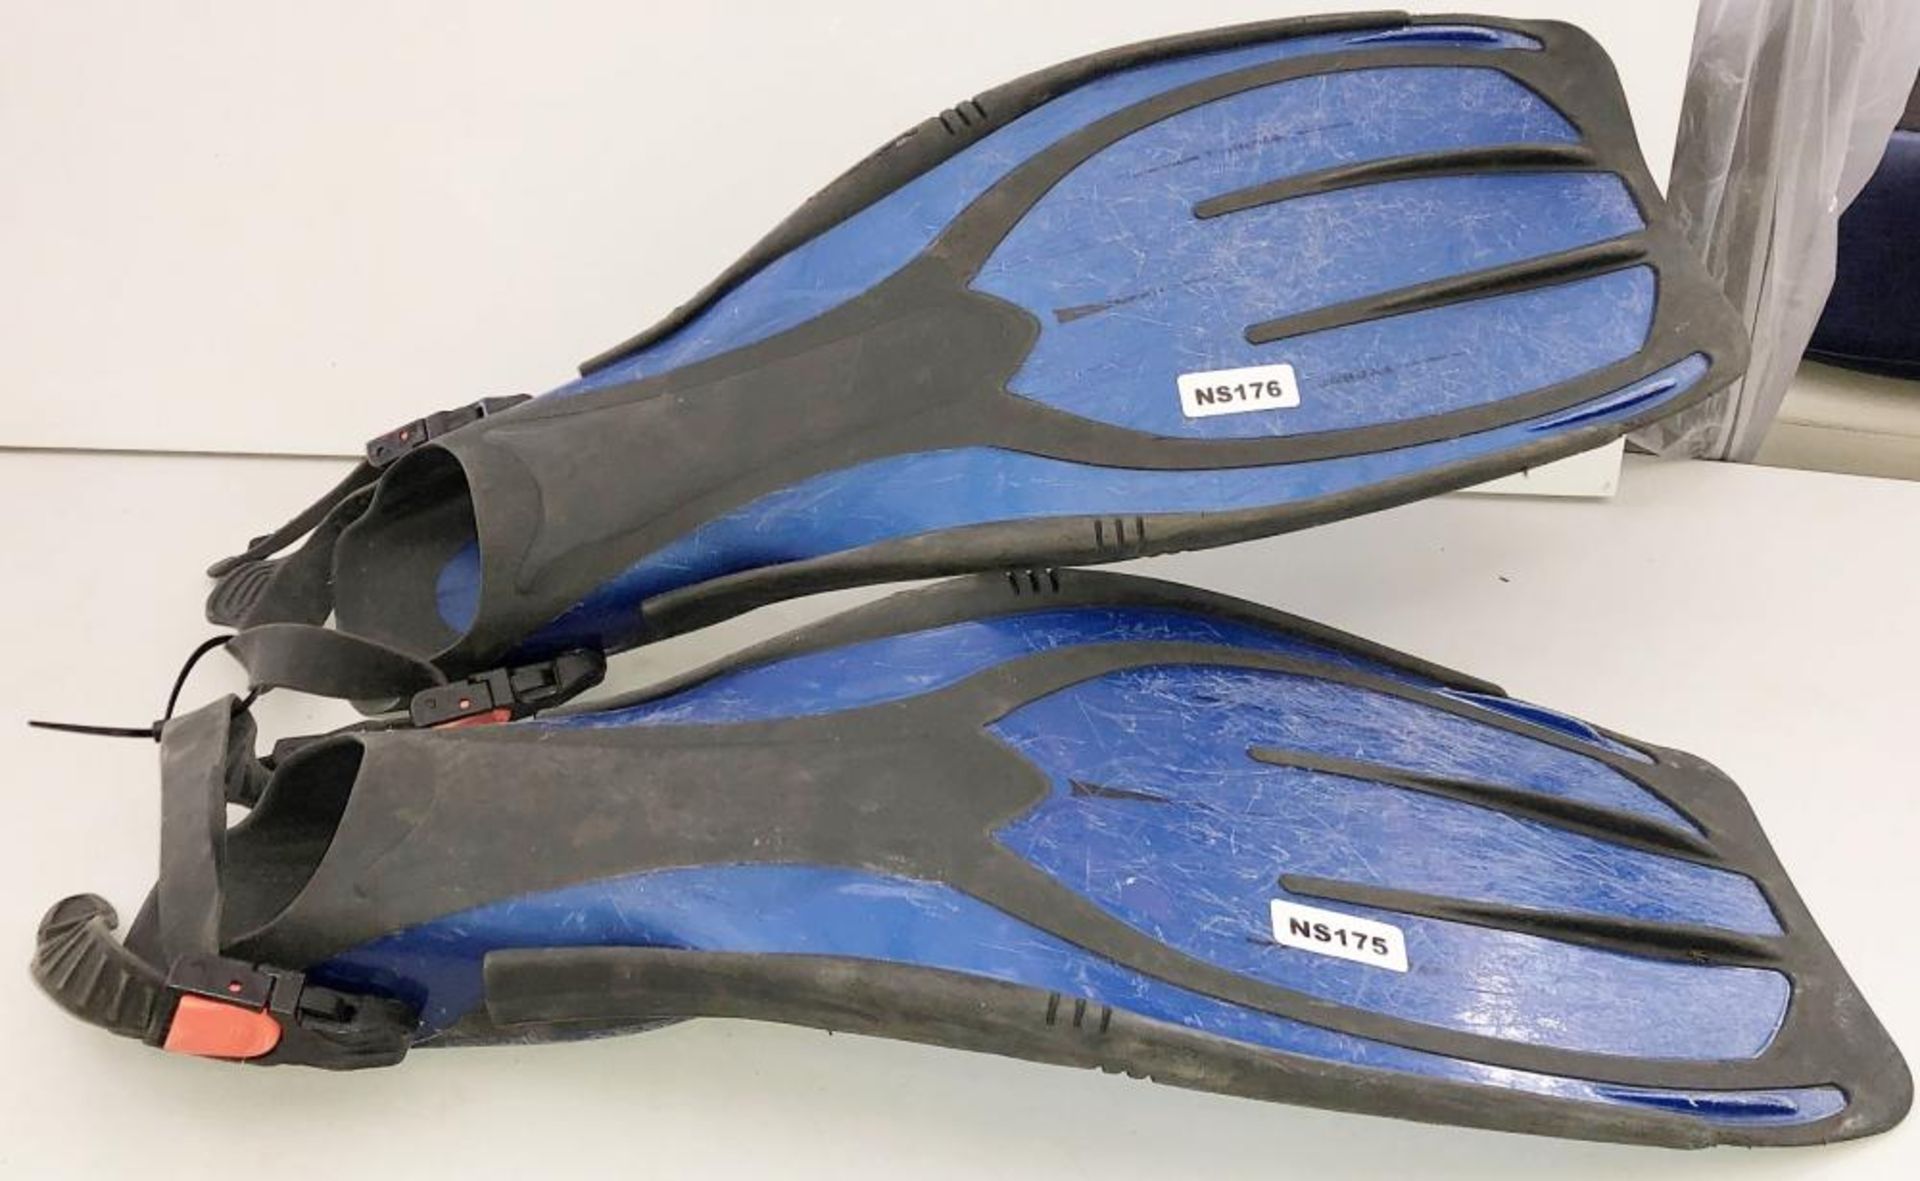 5 x Pairs Of Branded Diving Fins - Ref: NS175, NS176, NS177, NS178, NS179, NS180, NS181, NS182, NS18 - Image 15 of 17